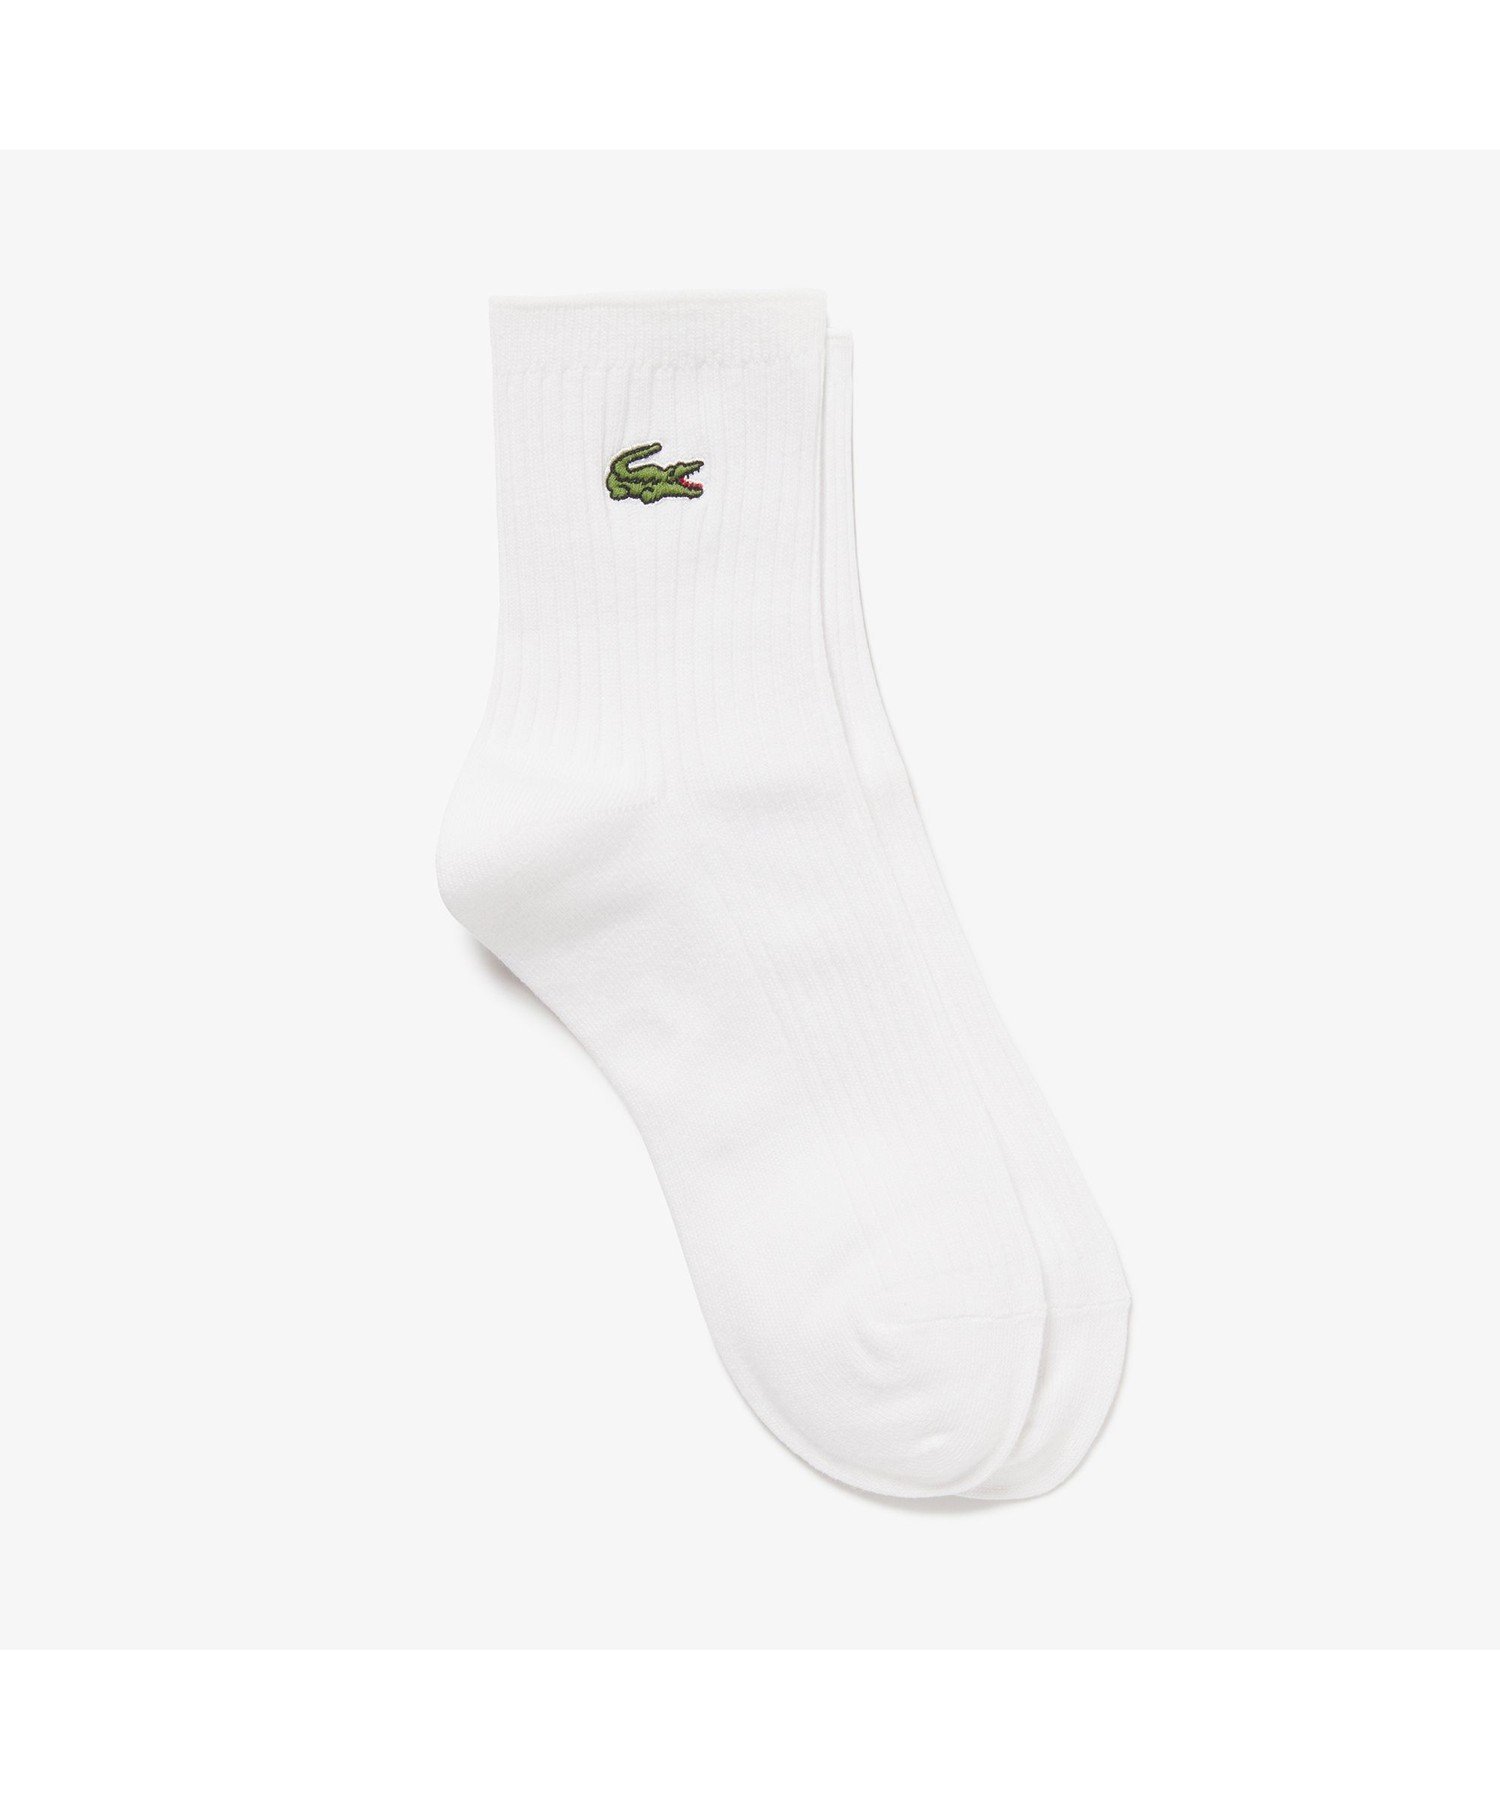 LACOSTE クロックエンブレムプレーン